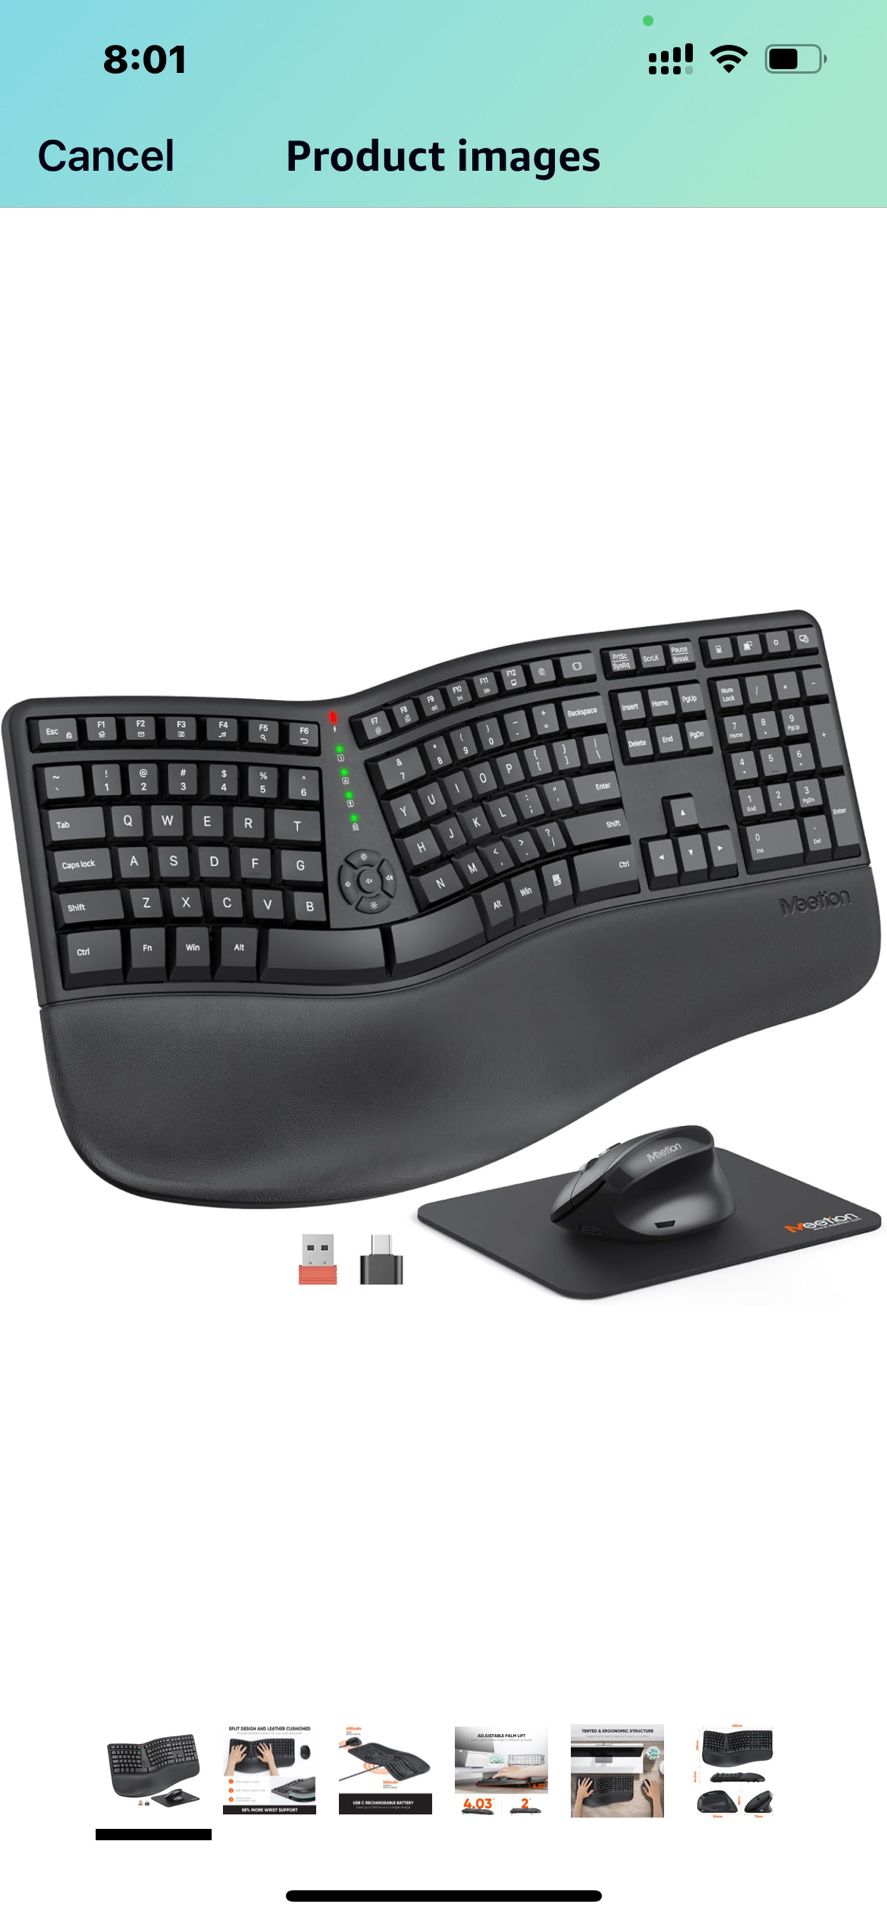 MEETION Ergonomic Wireless Keyboard and Mouse